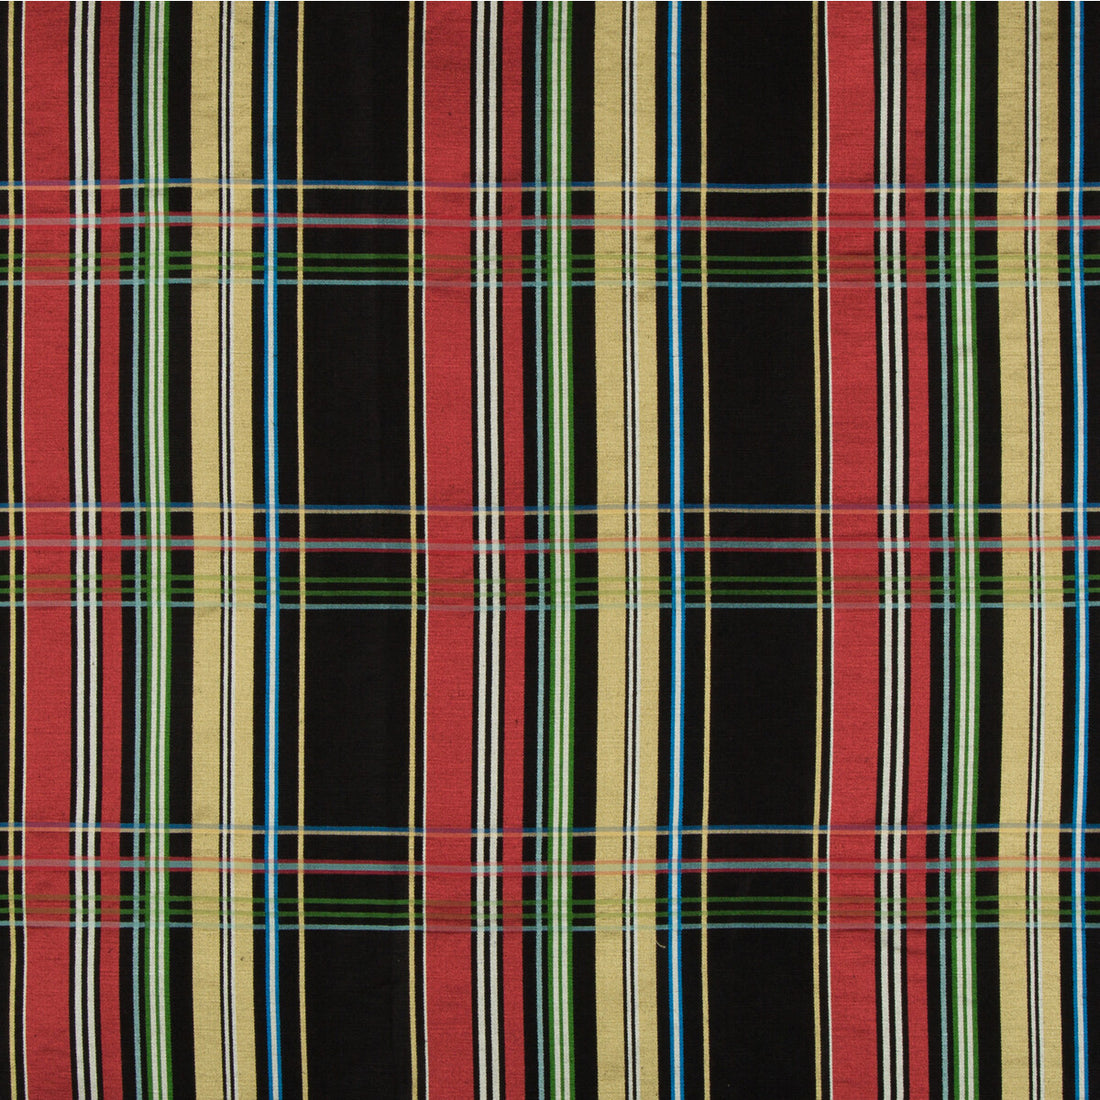 La Comelle Plaid fabric in onyx color - pattern 8018108.8.0 - by Brunschwig &amp; Fils in the Baret collection